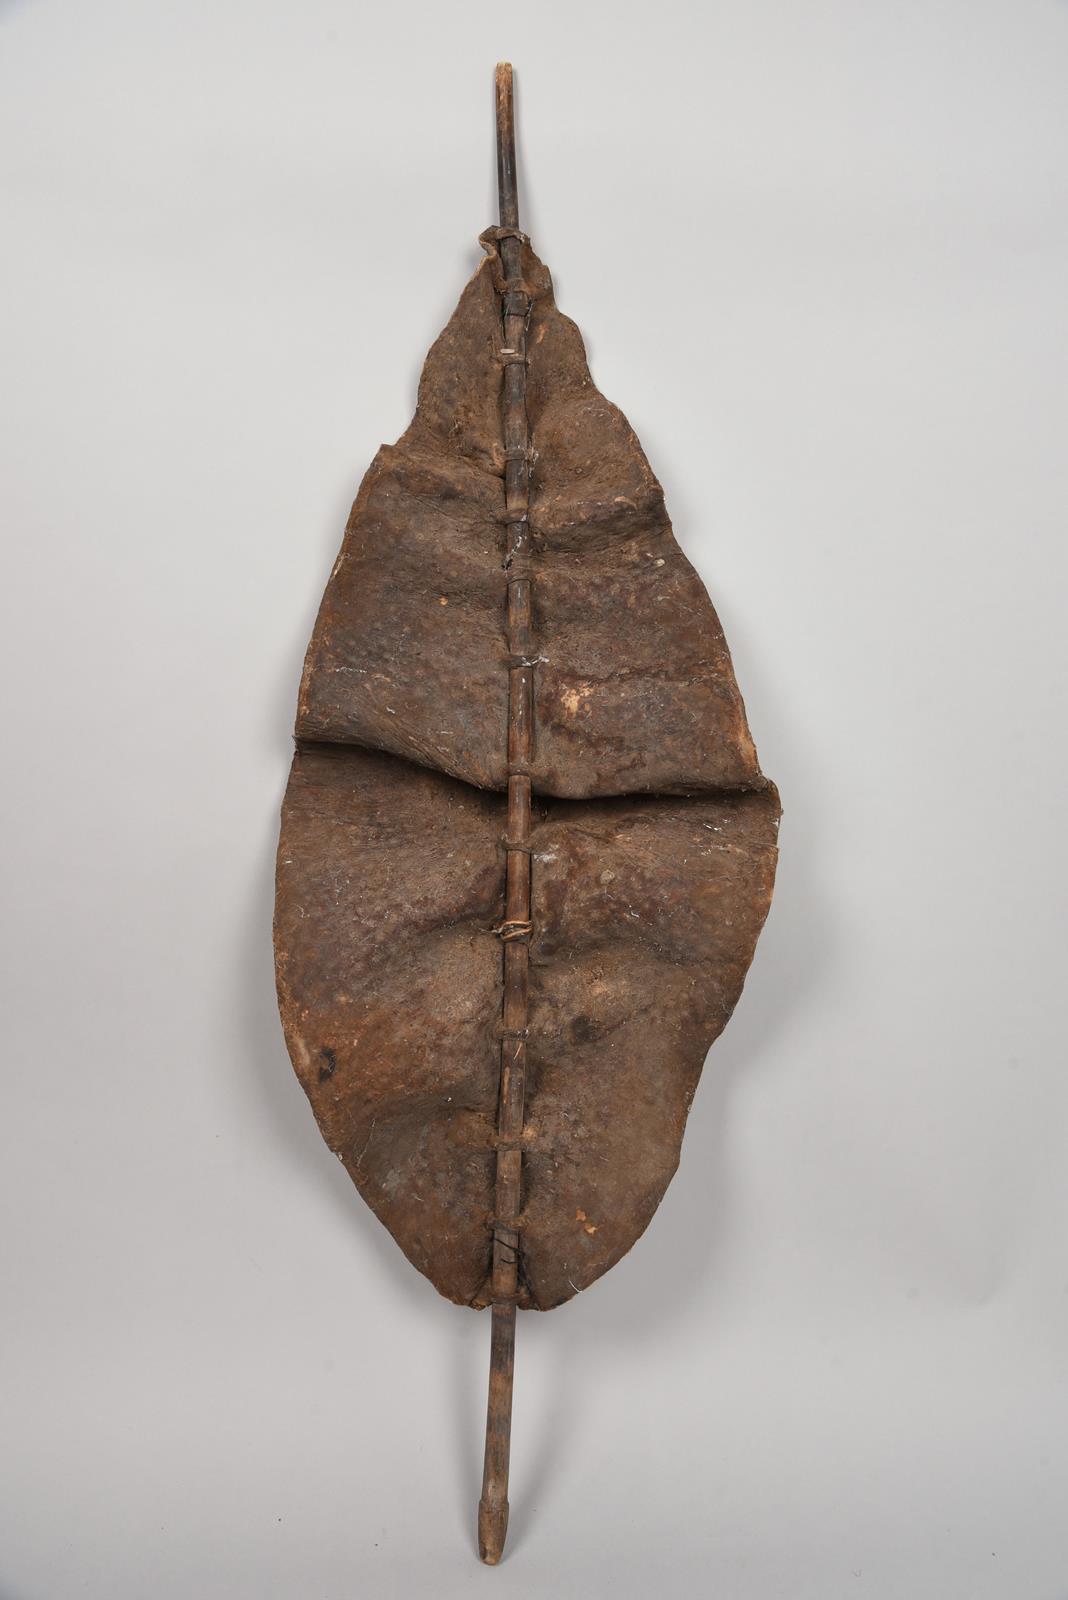 A Dinka shield South Sudan hide with embossed dimples and with a wooden shaft, 139.5cm long. - Image 2 of 2